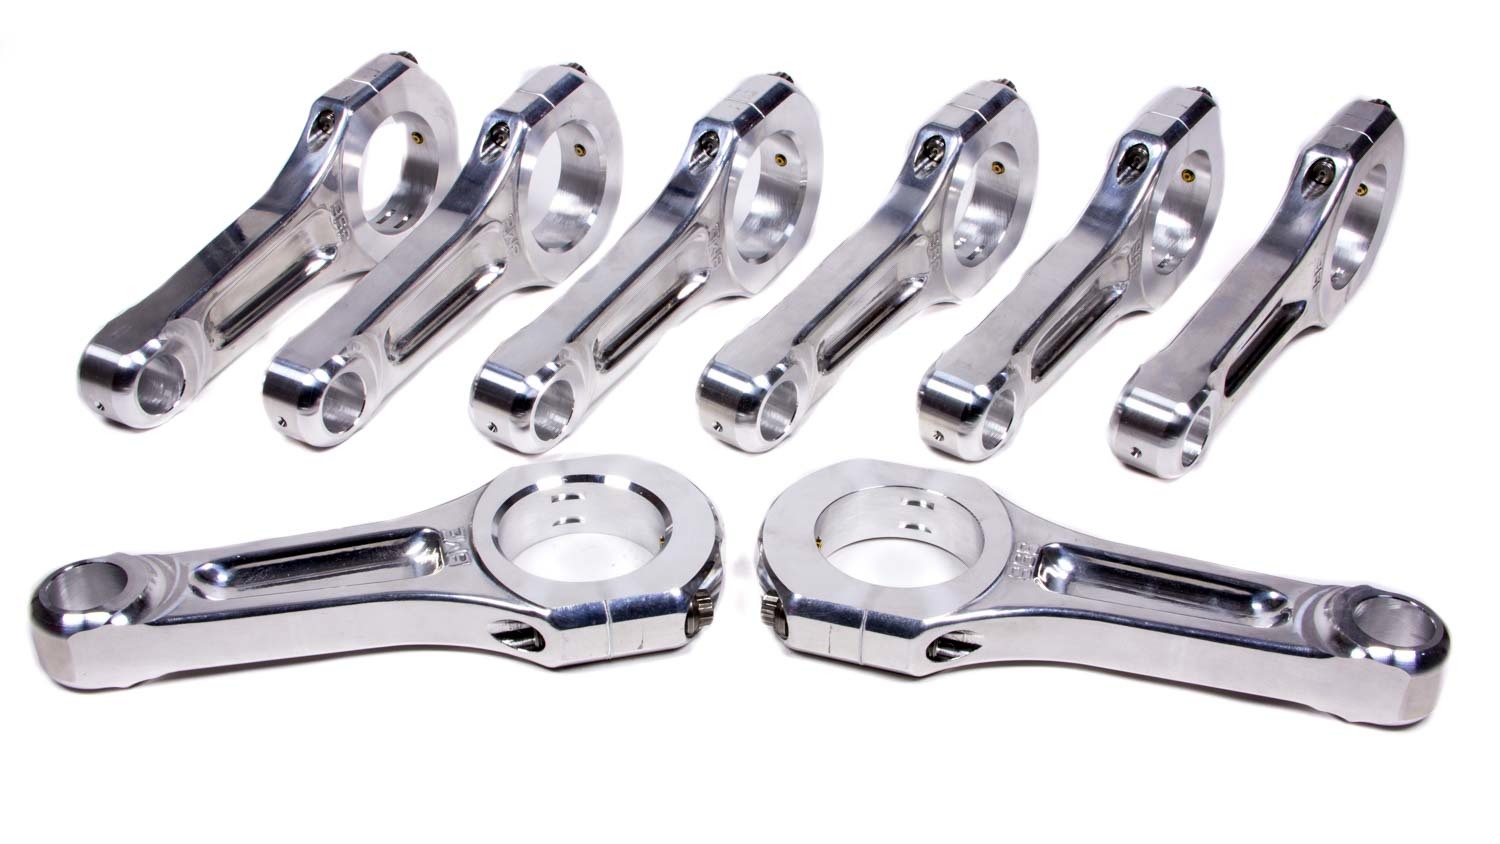 Bill Miller 396665 Connecting Rod, I Beam, 6.800 in Long, Bushed, 7/16 in Cap Screws, Forged Aluminum, Big Block Chevy, Set of 8